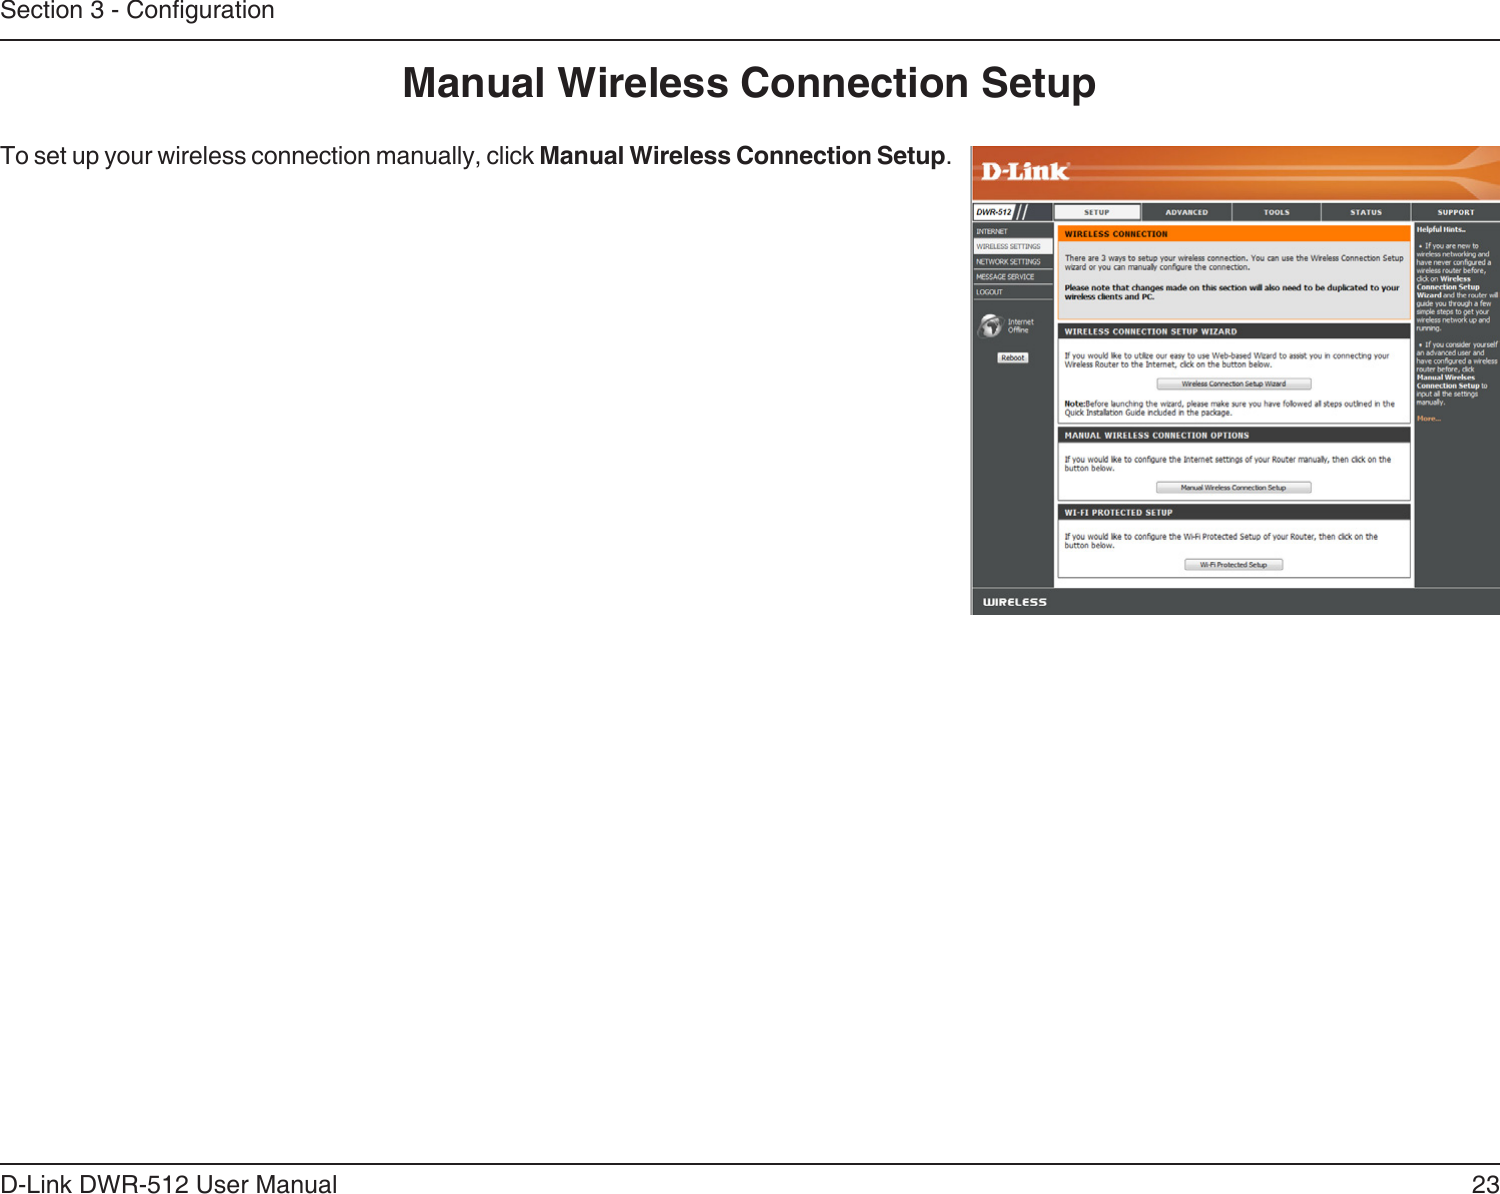 23D-Link DWR-512 User ManualSection 3 - CongurationManual Wireless Connection SetupTo set up your wireless connection manually, click Manual Wireless Connection Setup.